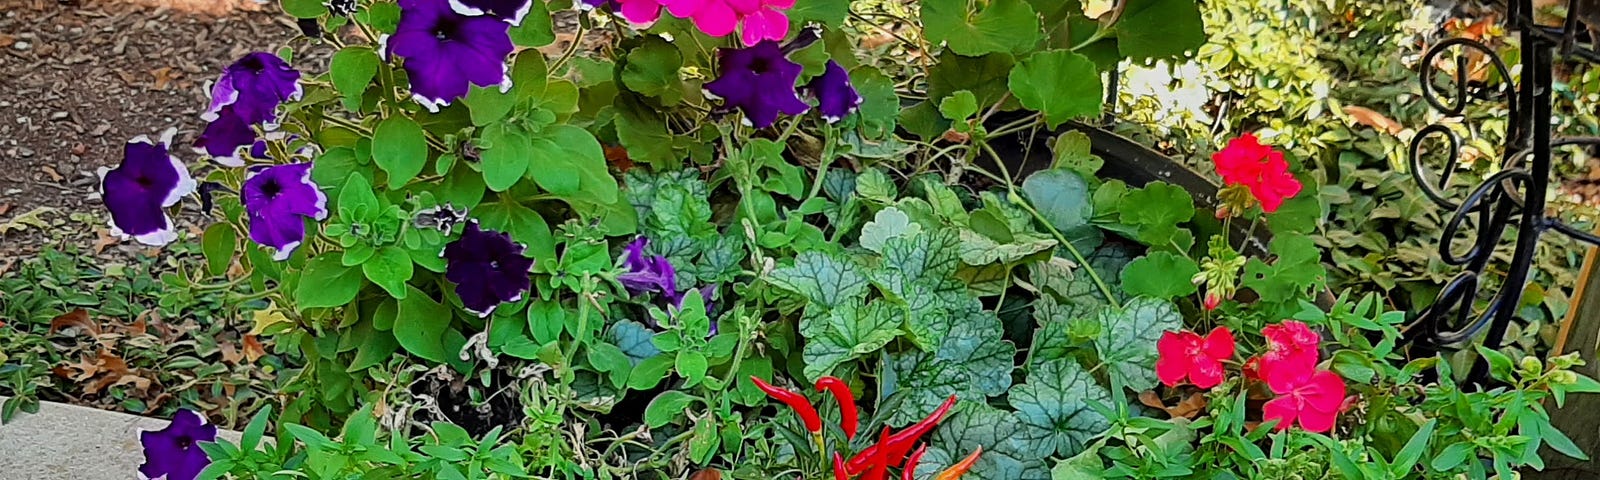 Big pot of purple petunias, red ornamental peppers, snapdragons, and more.